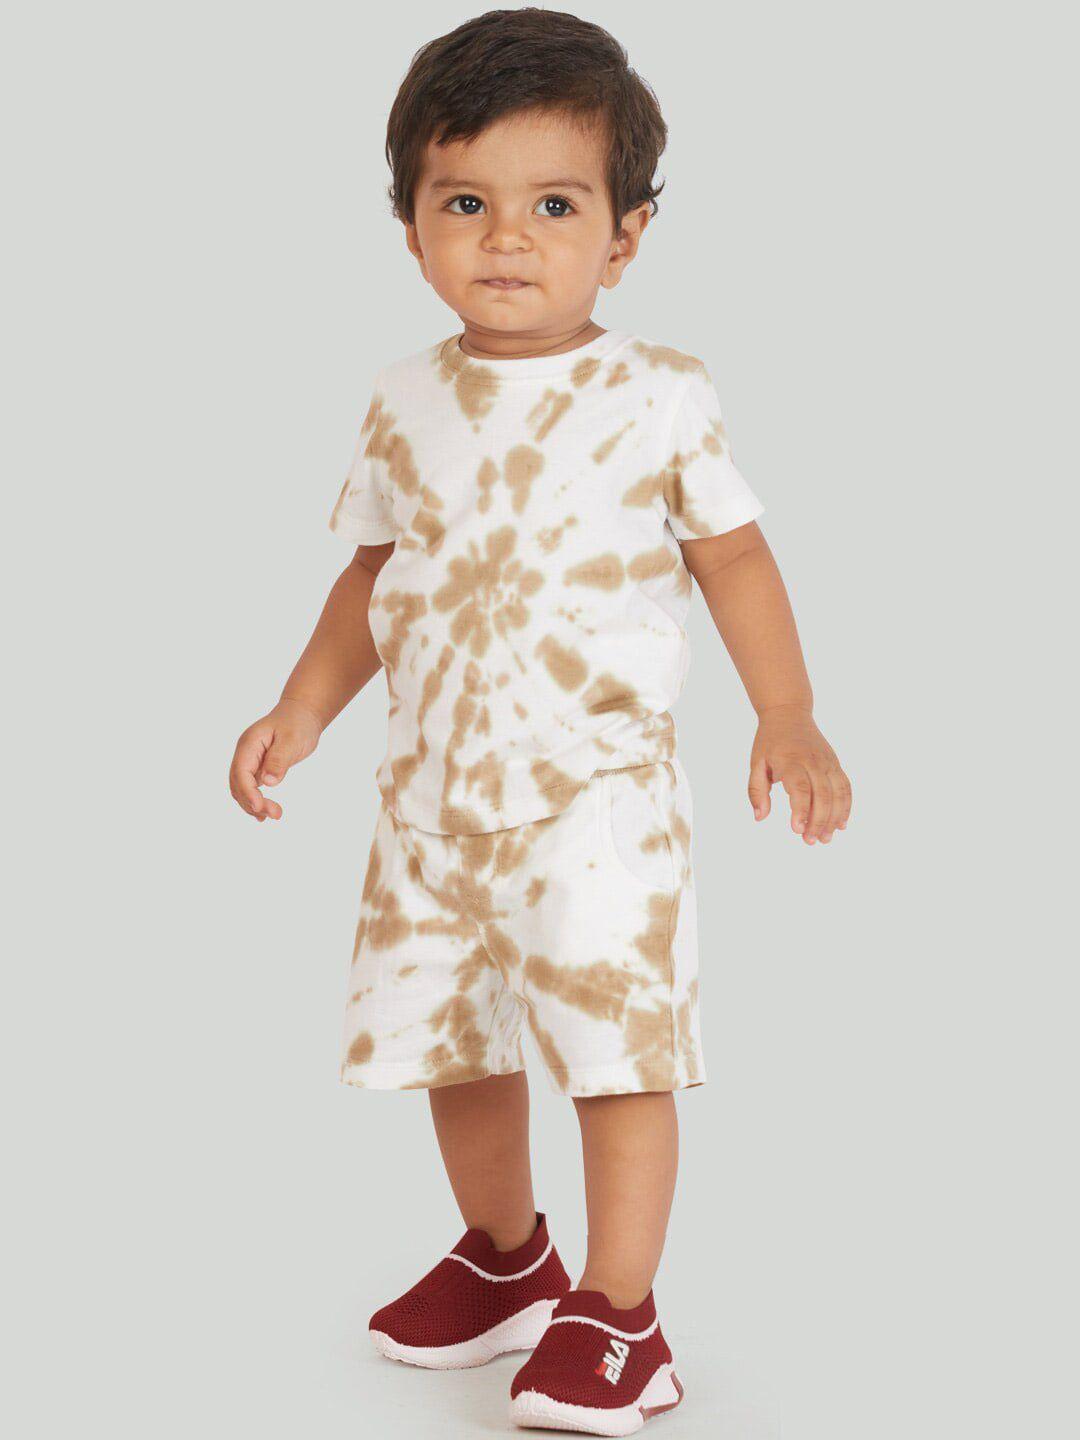 zalio boys white & brown dyed cotton t-shirt with shorts